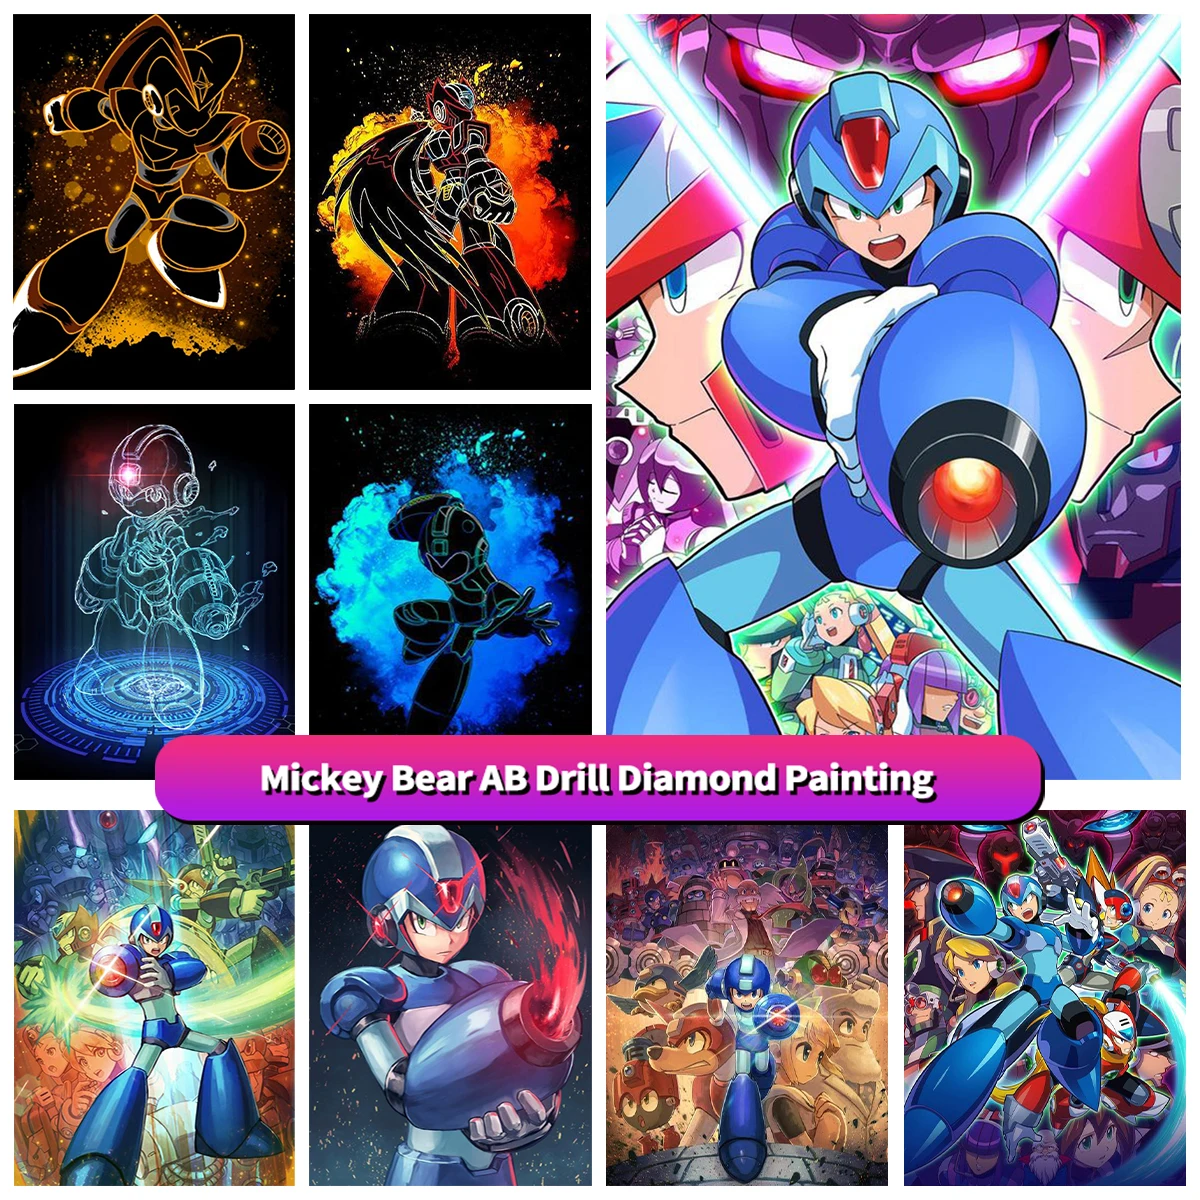 

Game Poster 5D Diamond Painting Kit Mega Man Pixel Art Rockman Crystal Cross Stitch Embroidery Module Home Decor Gifts for Boys